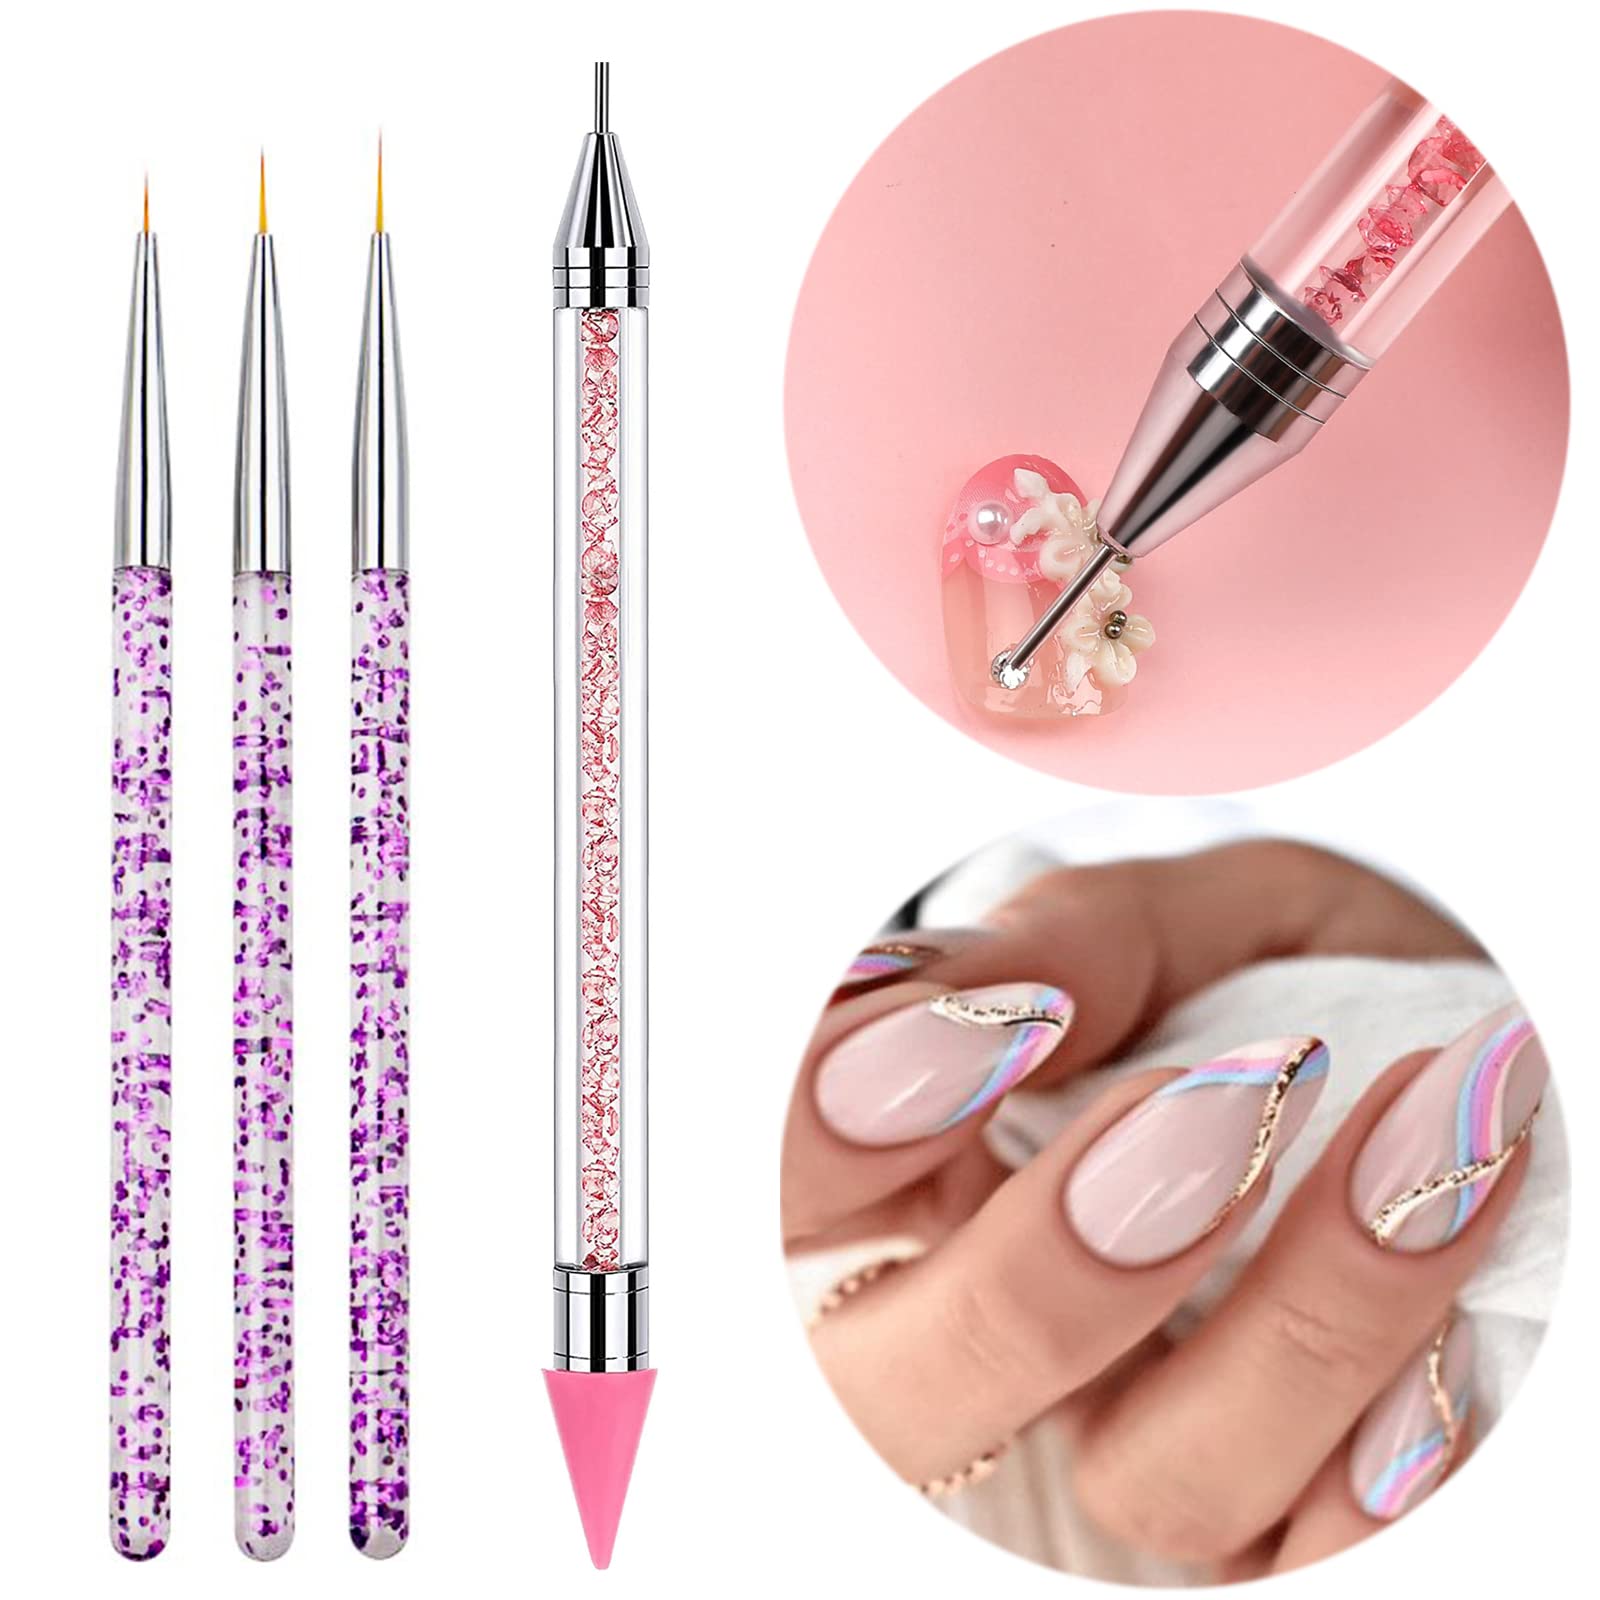 Nail Rhinestone Picker Dotting Tool, 3pcs Nail Art Brushes for Painting  with Different Size, Dual-ended